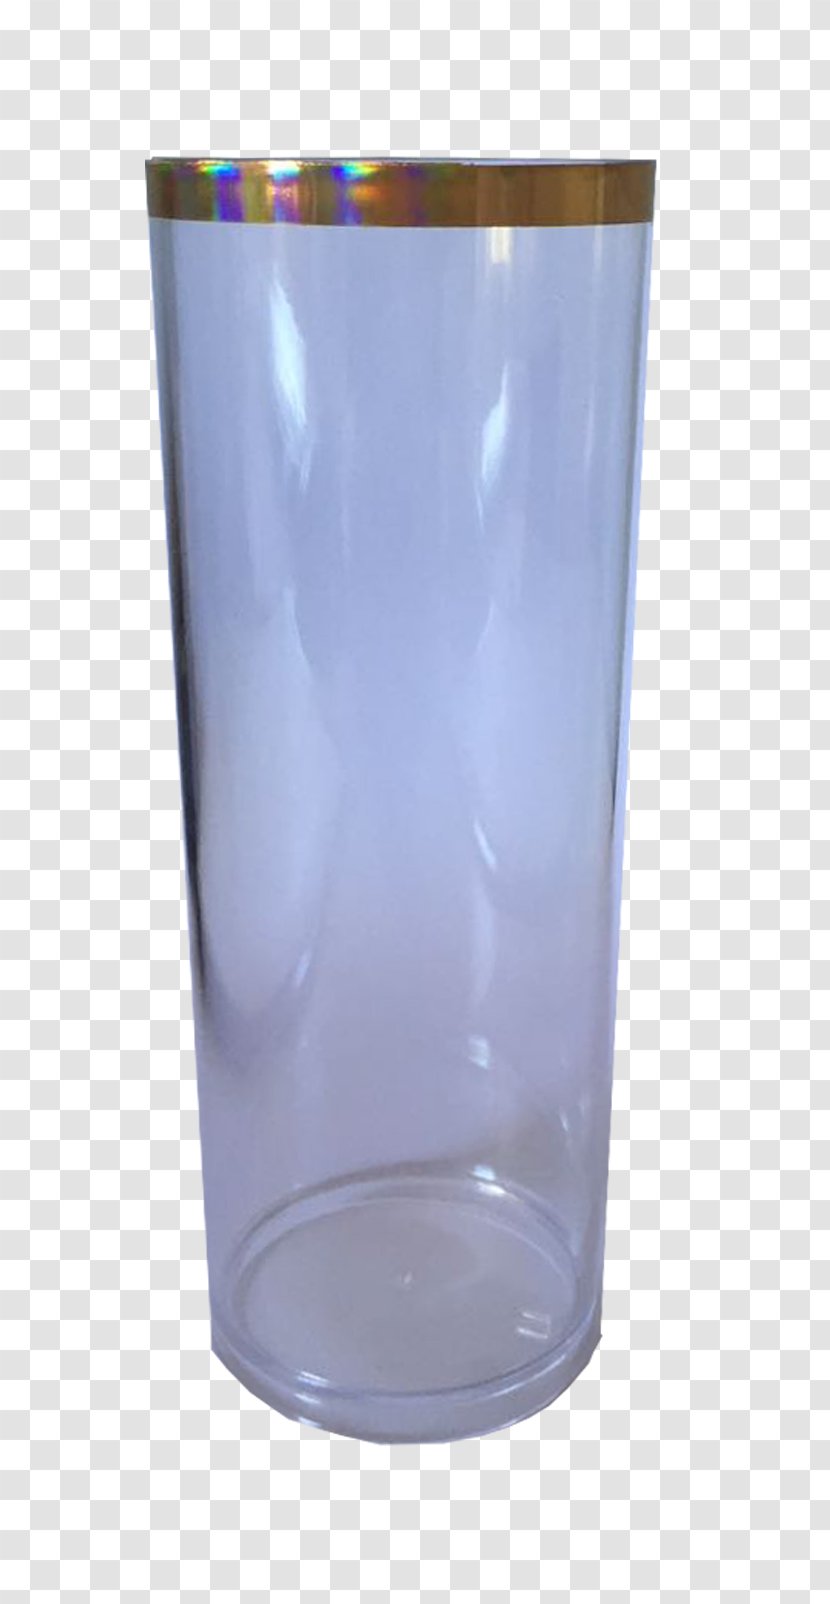 Highball Glass Pint Old Fashioned Transparent PNG